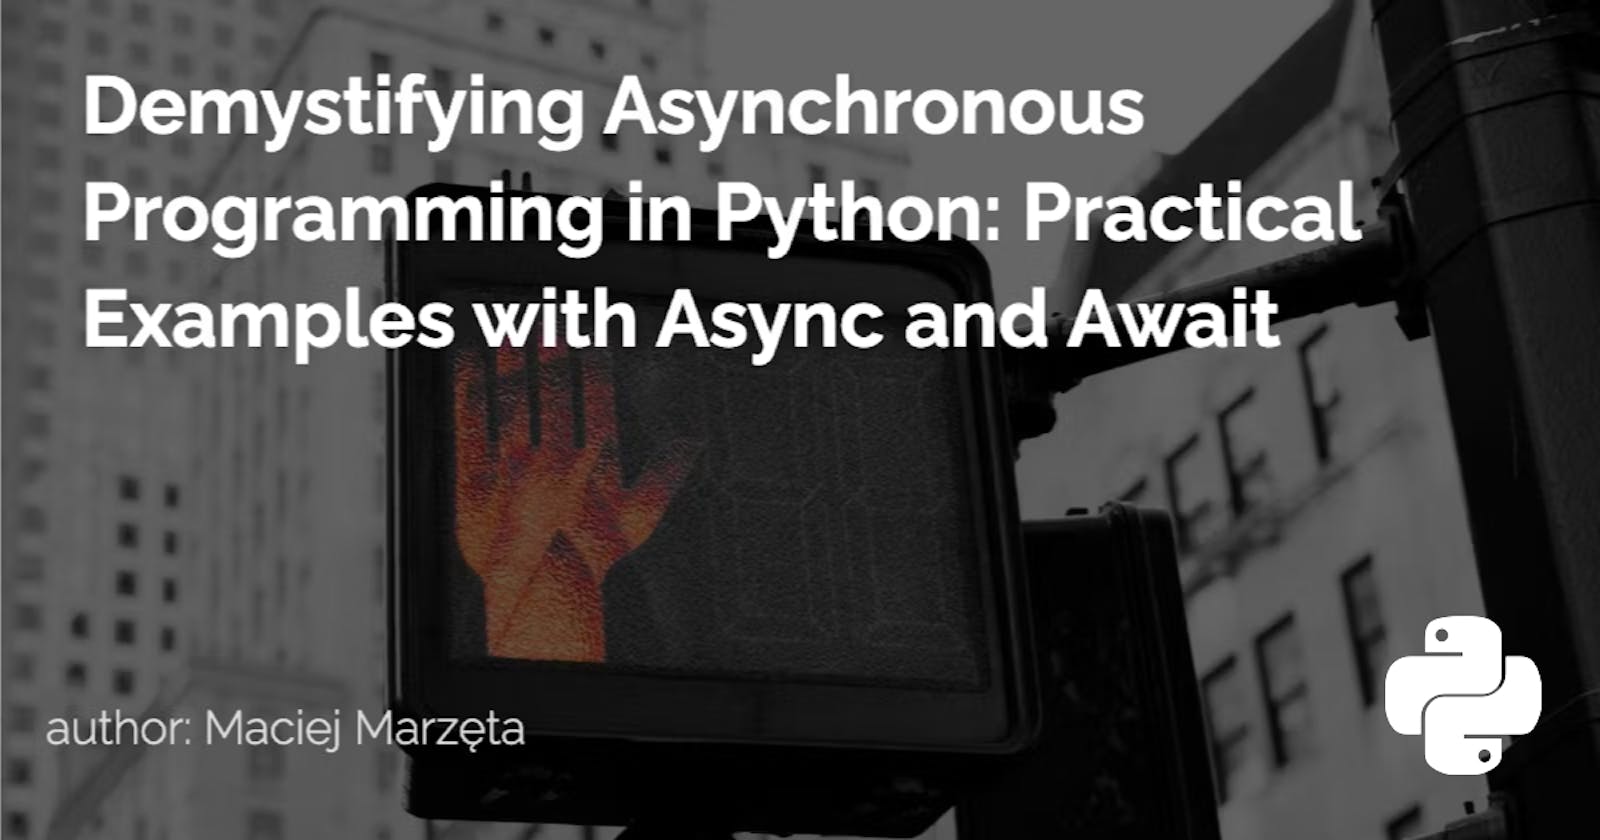 Demystifying Asynchronous Programming in Python: Practical Examples with Async and Await